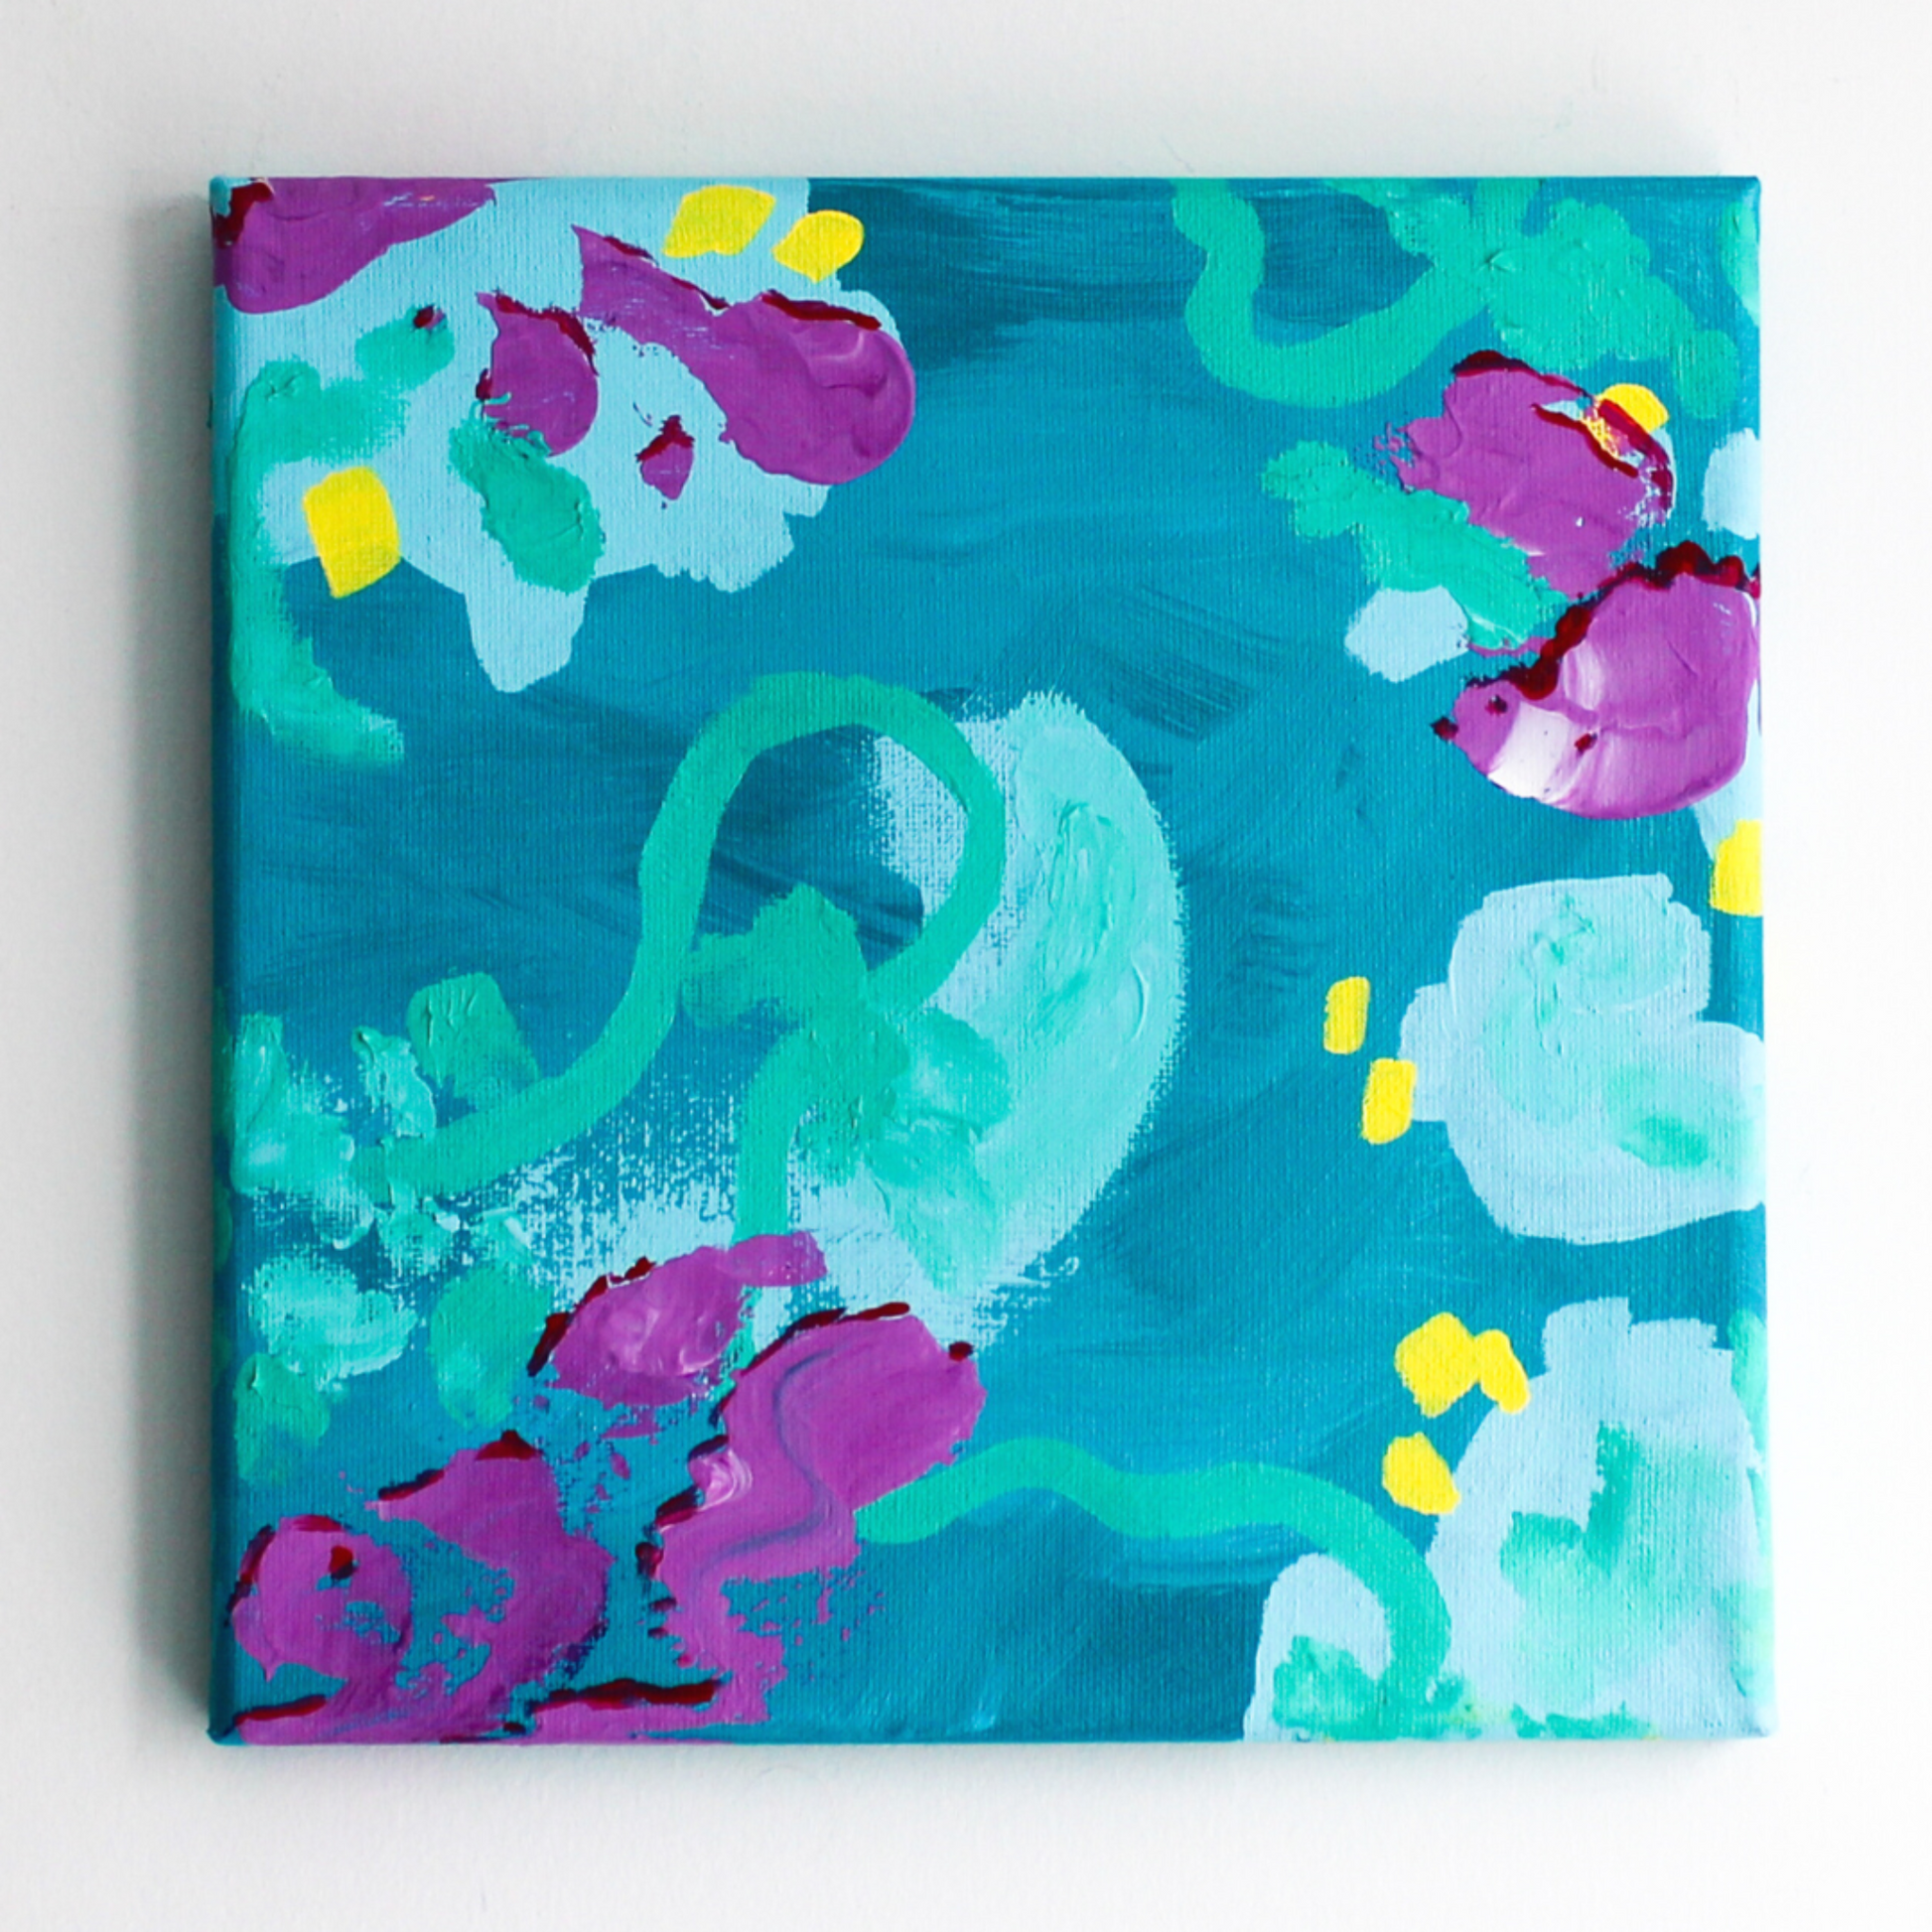 A grey wall with an abstract blue, turquoise, and purple painting.